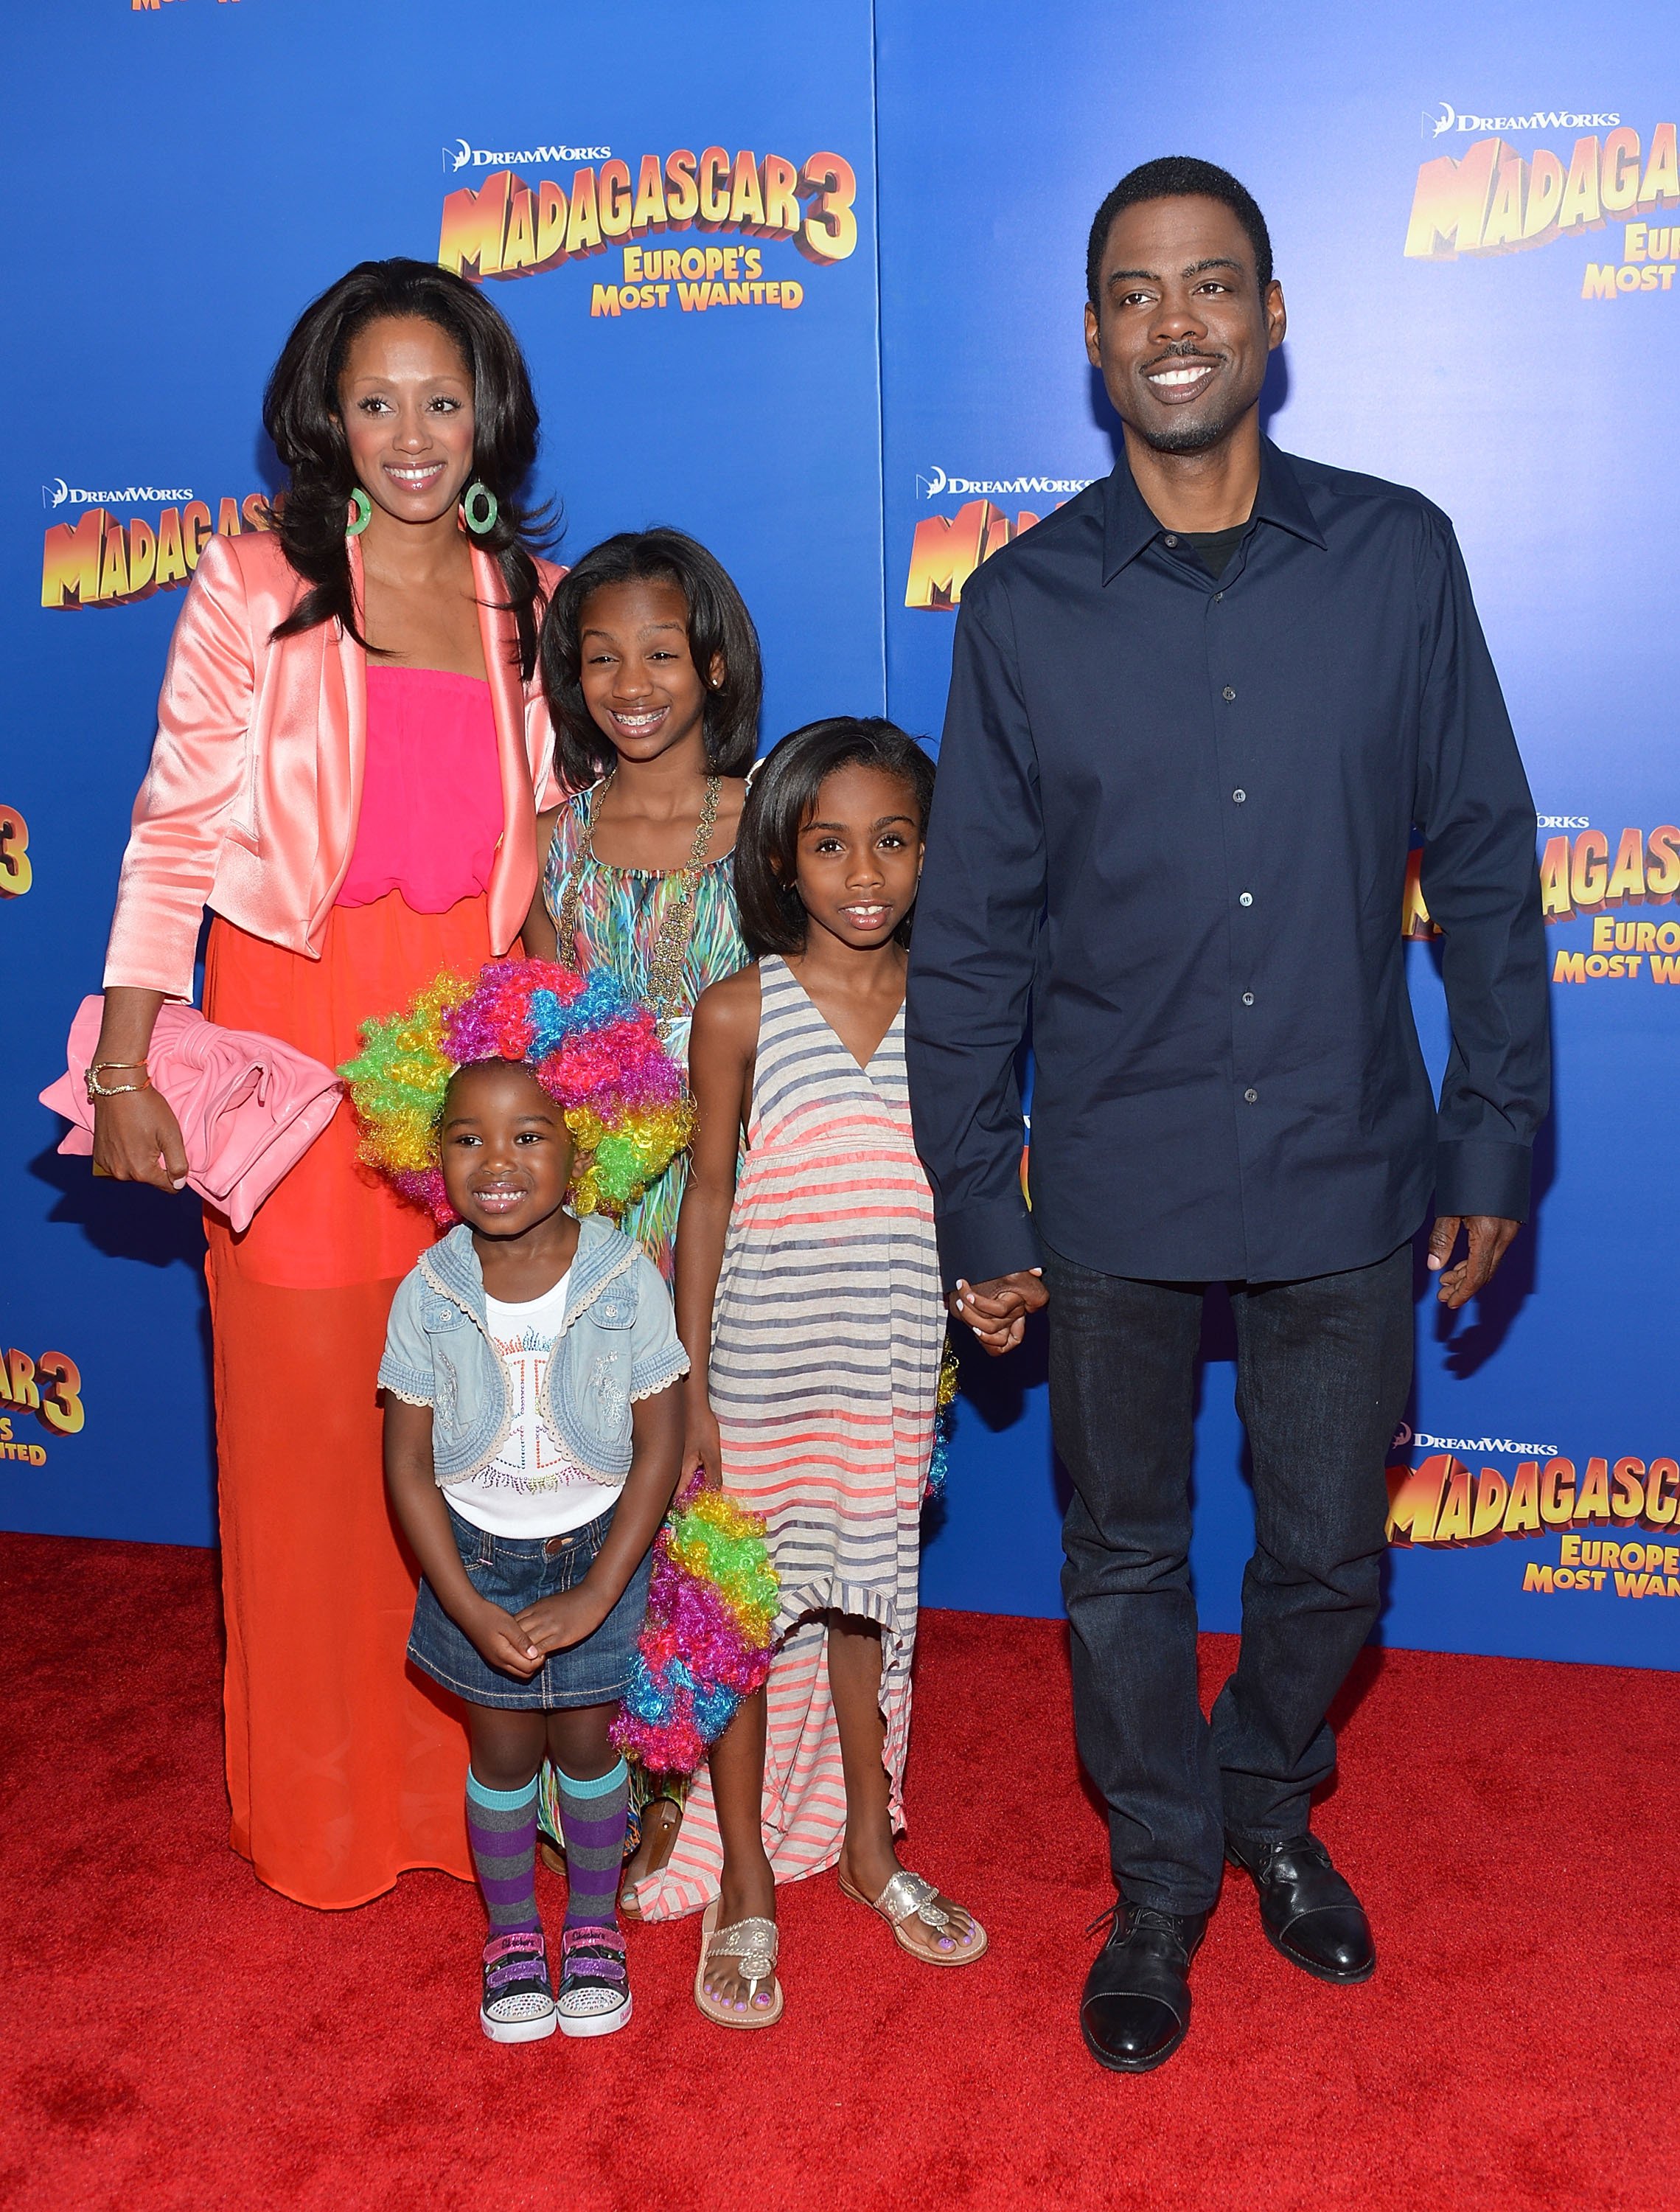 Chris Rock, his wife Malaak Rock and daughters Lola Rock, Zahra, and Ntombi attend the premiere for "Madagascar 3: Europe's Most Wanted" on June 7, 2012, New York | Getty Images (Photo by Robin Marchant/FilmMagic)